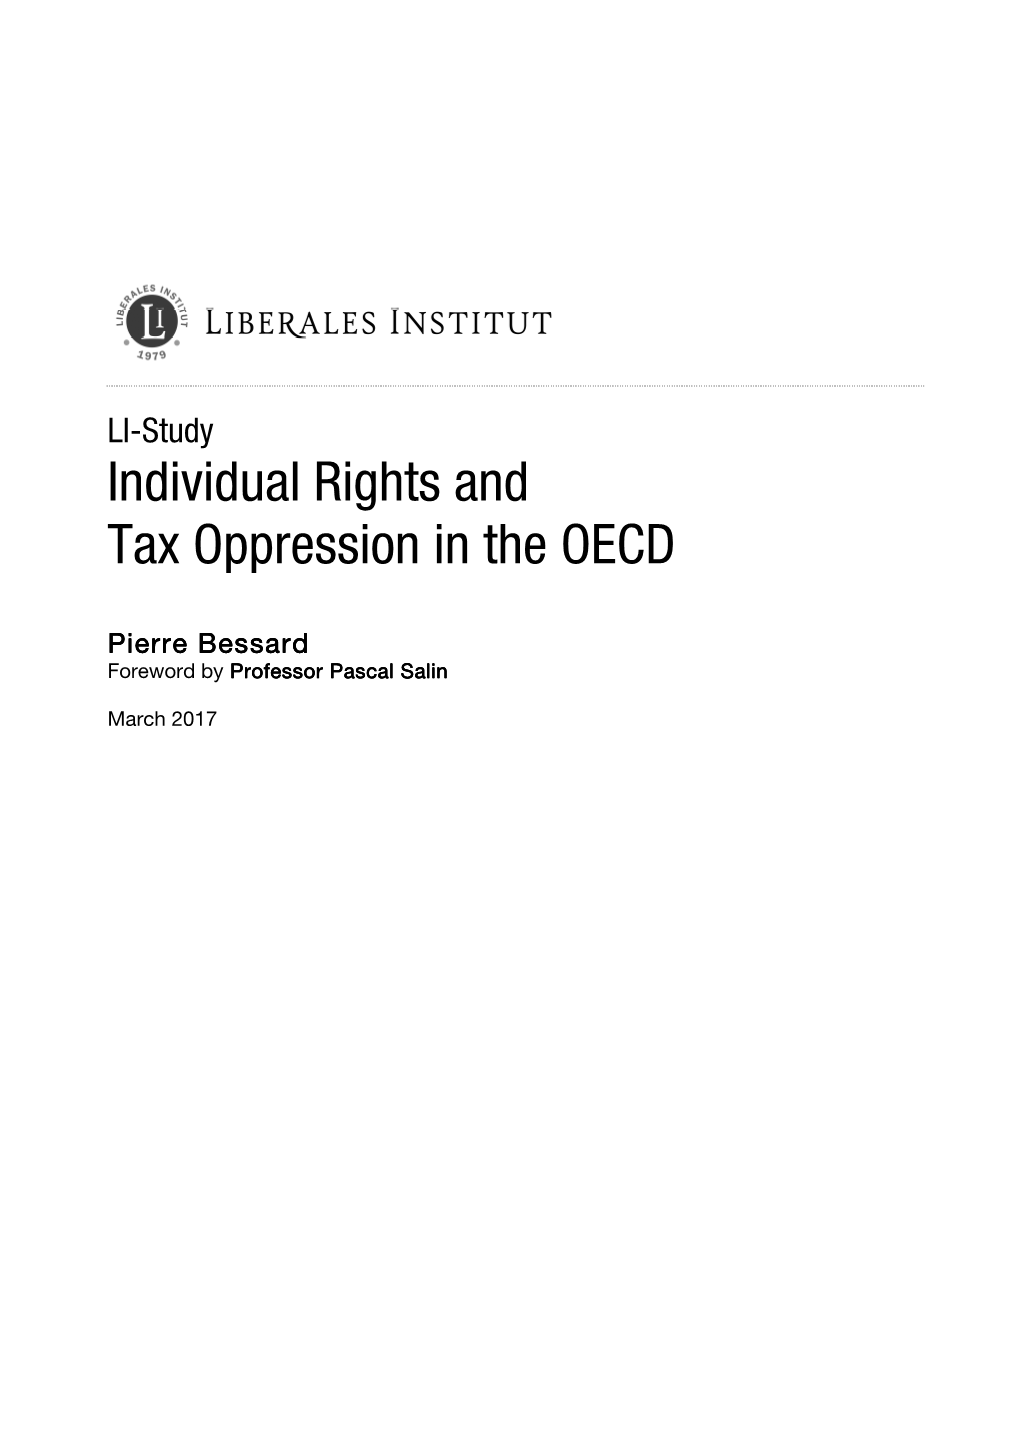 Liberales Institut / Individual Rights and Tax Oppression in the OECD